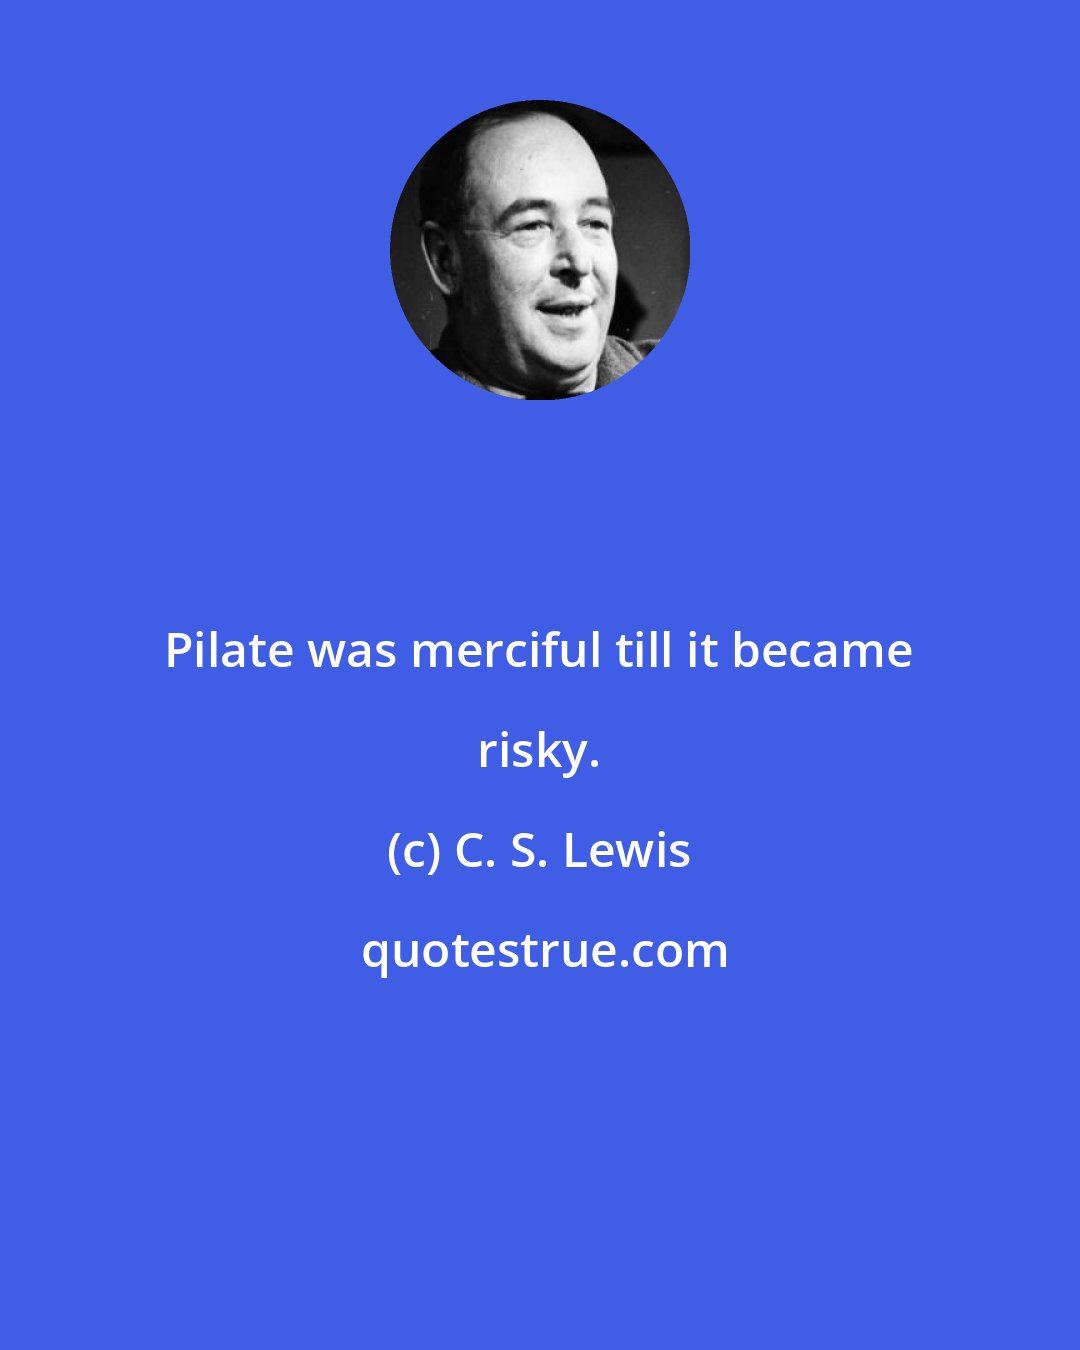 C. S. Lewis: Pilate was merciful till it became risky.